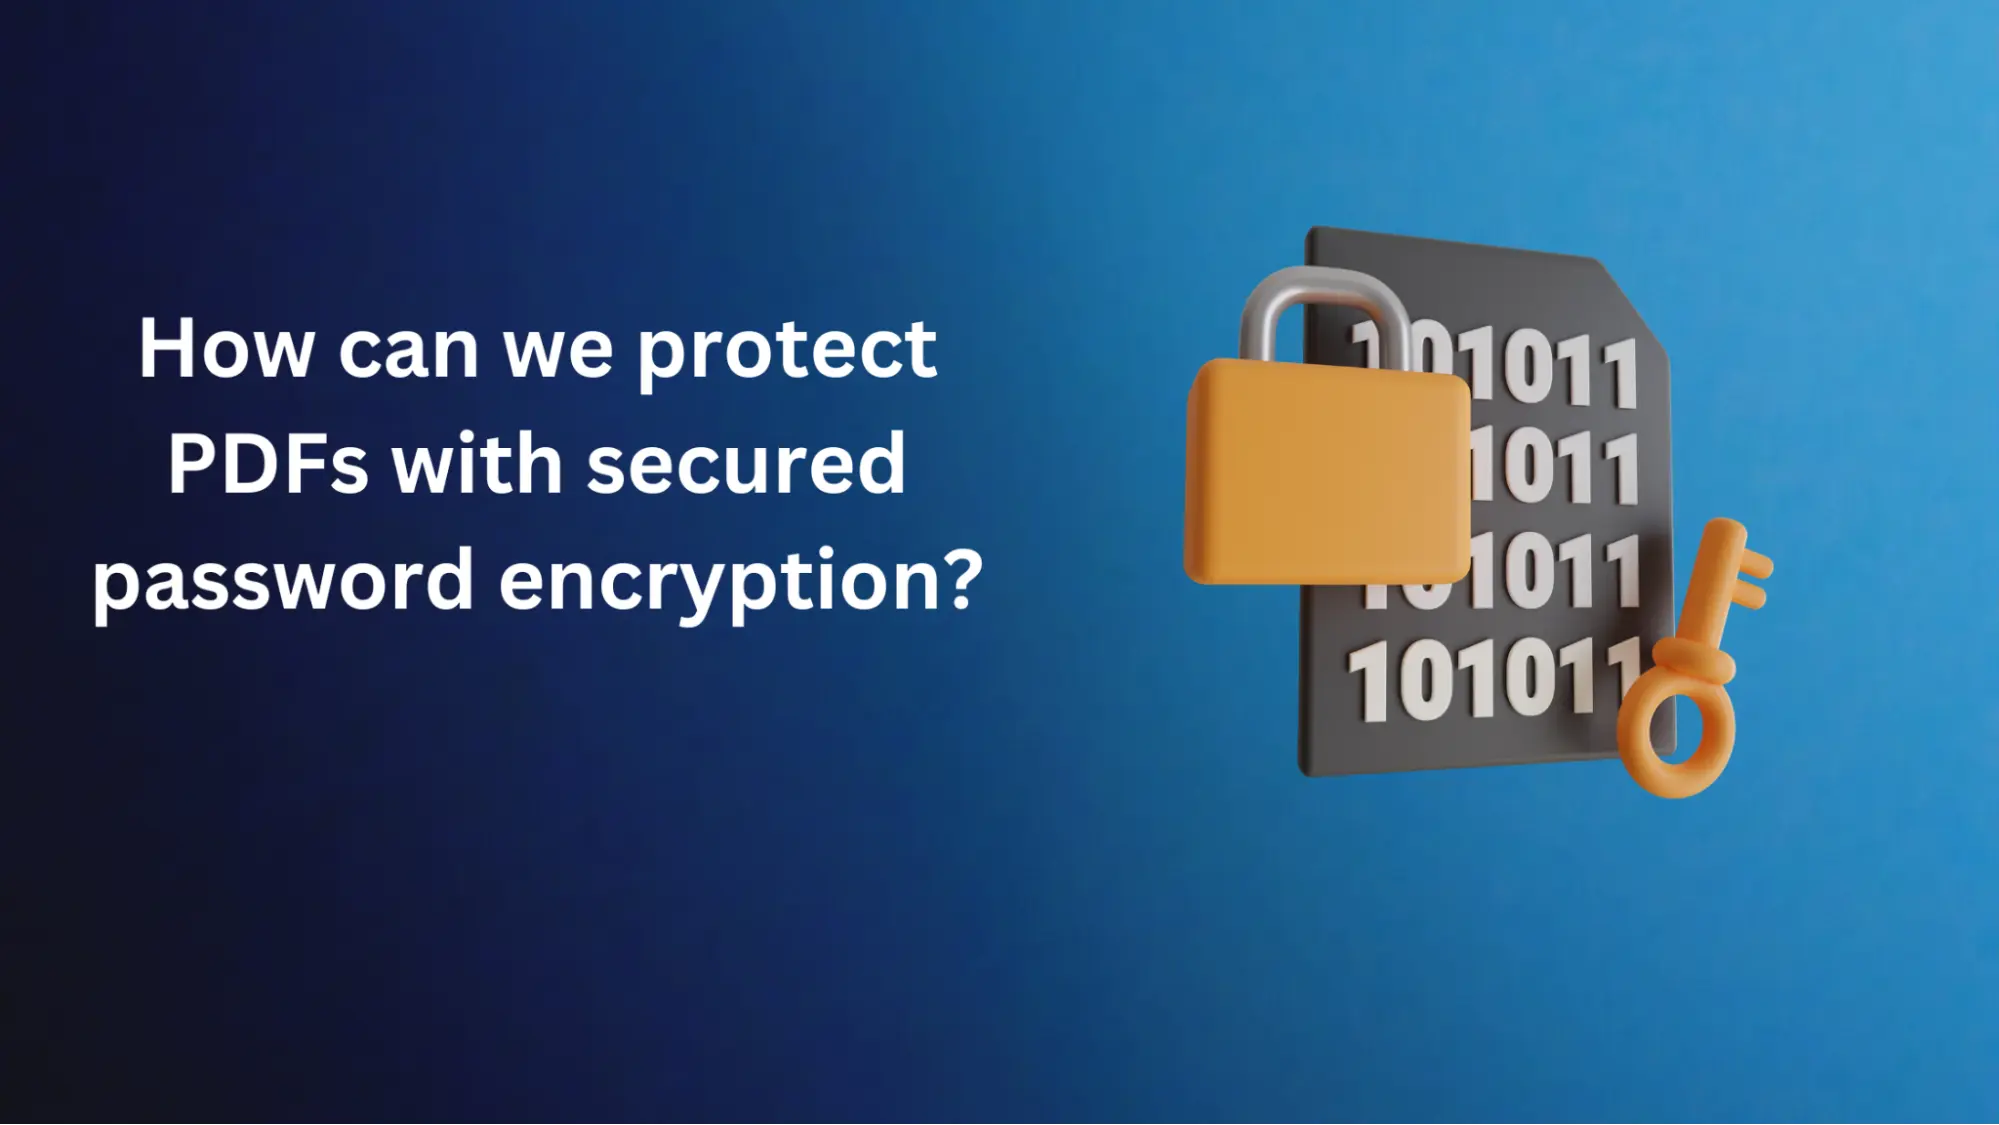 How can we protect PDFs with secured password encryption?